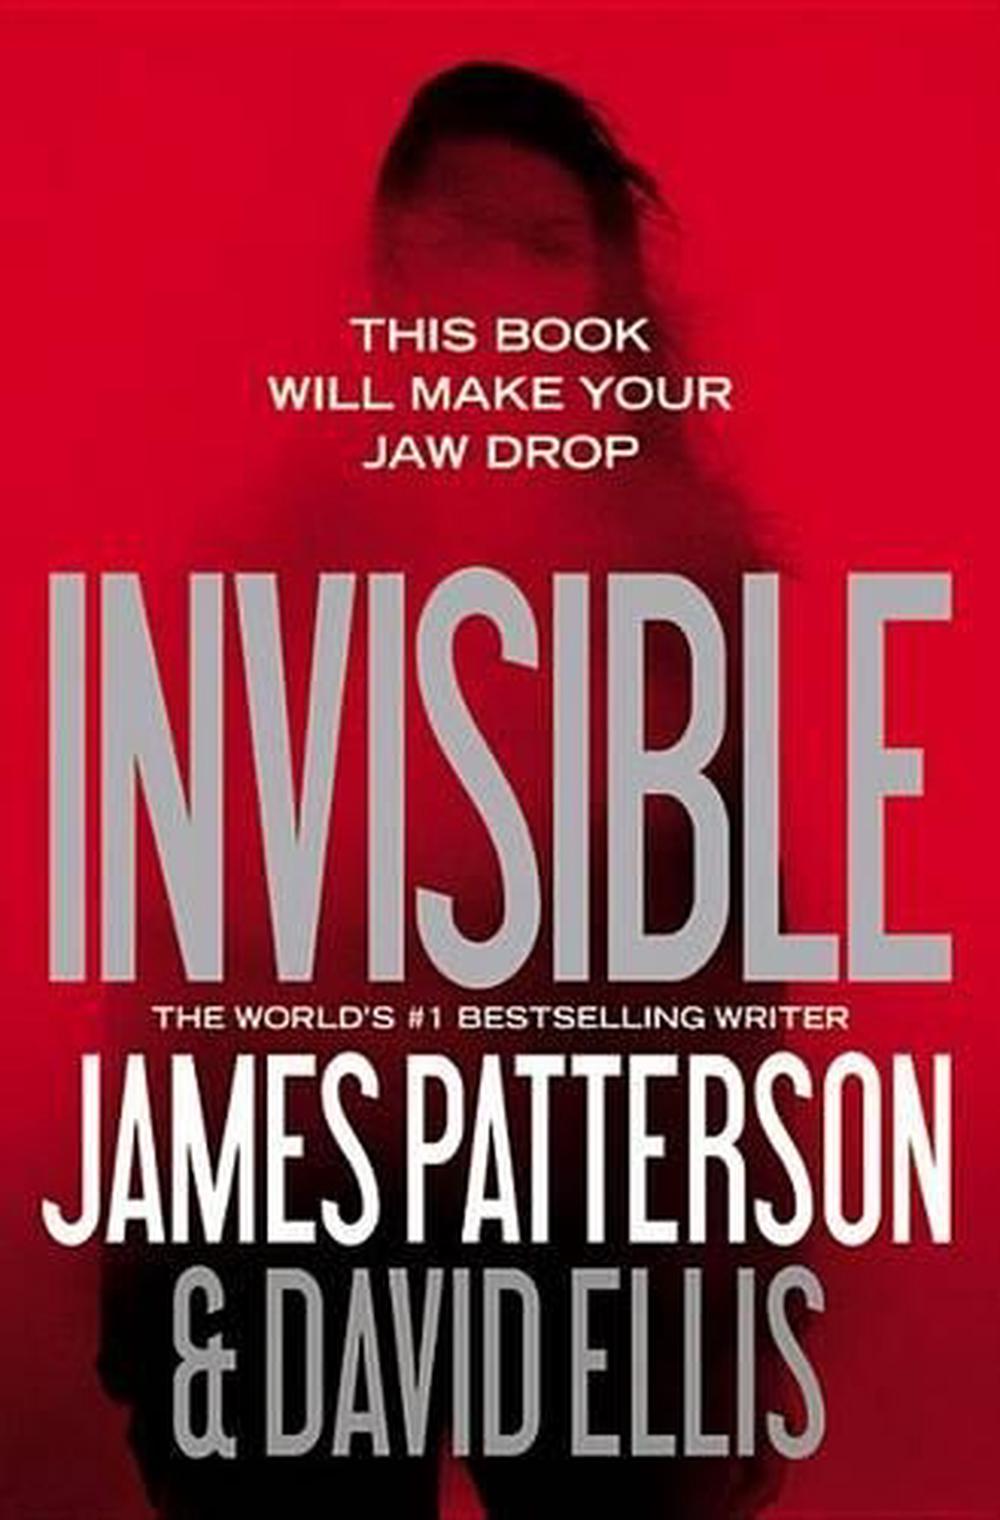 invisible graphic novel book review